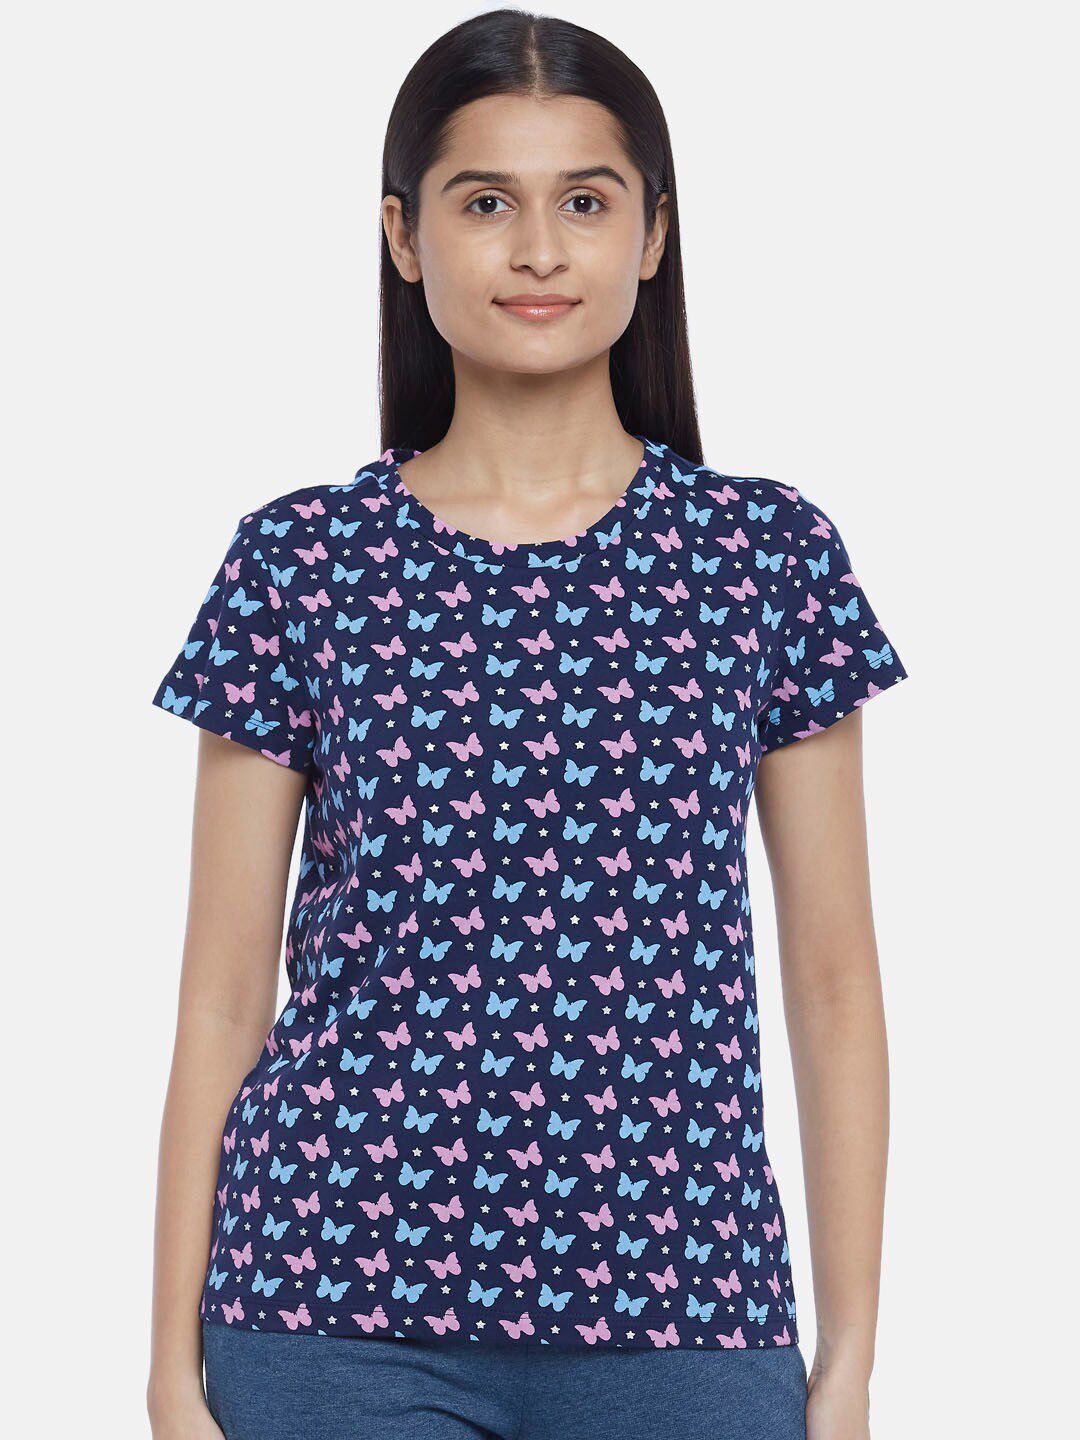 Dreamz by Pantaloons Women Navy Blue & Pink Print Pure Cotton Lounge T-shirt Price in India